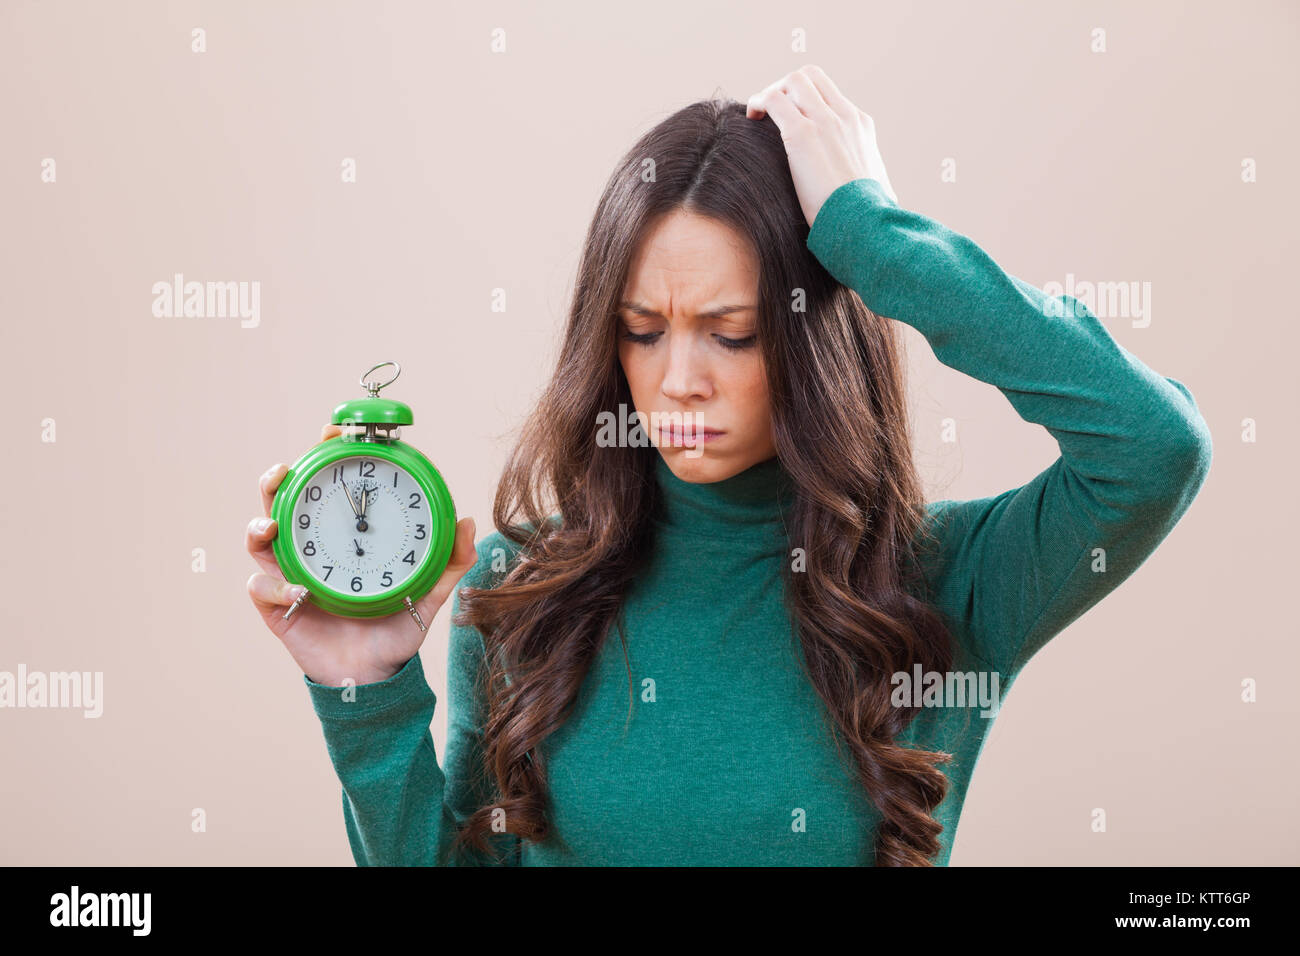 Woman holding clock that shows five to twelve time Stock Photo